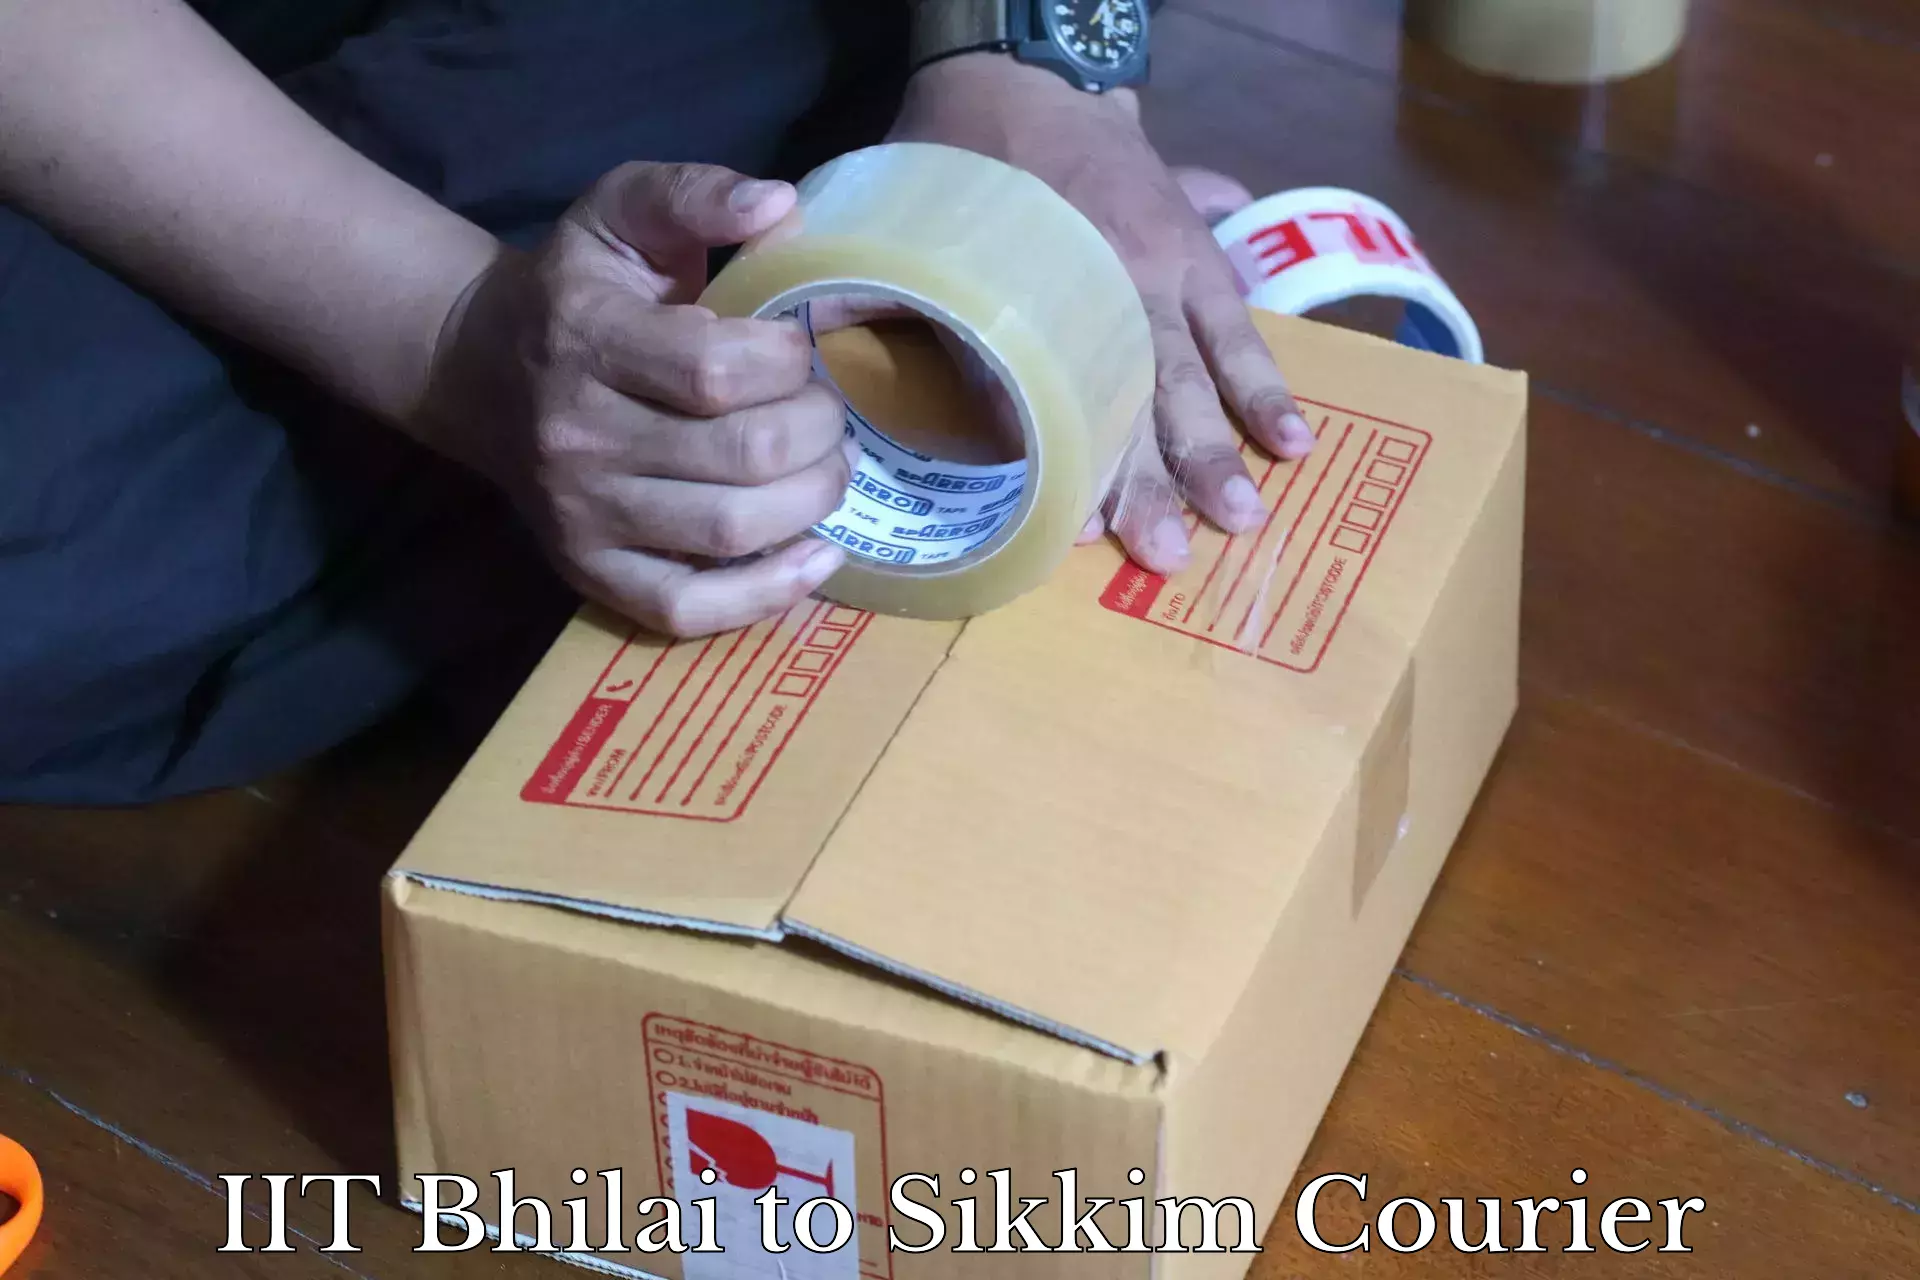 Cargo delivery service IIT Bhilai to East Sikkim